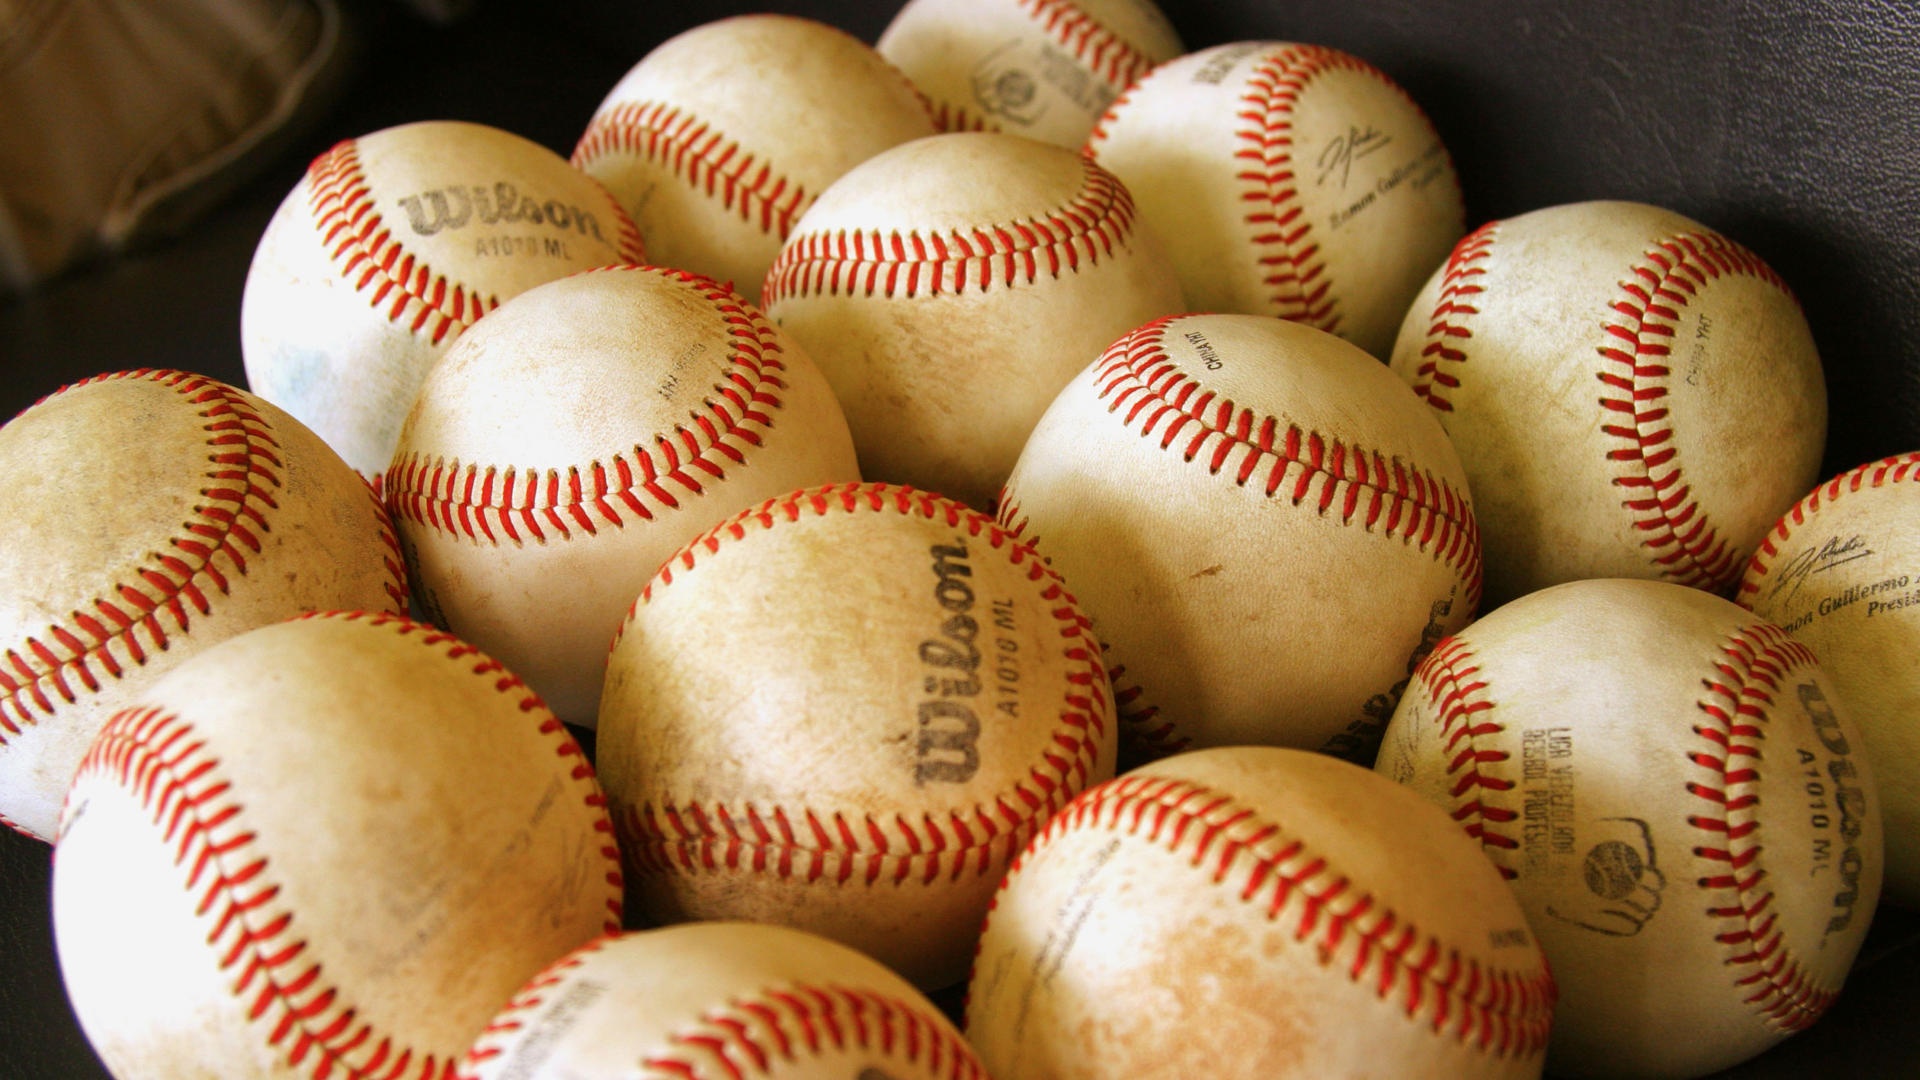 Ball Enjoy A Gallery Of Baseball Themed Wallpaper For Your Android